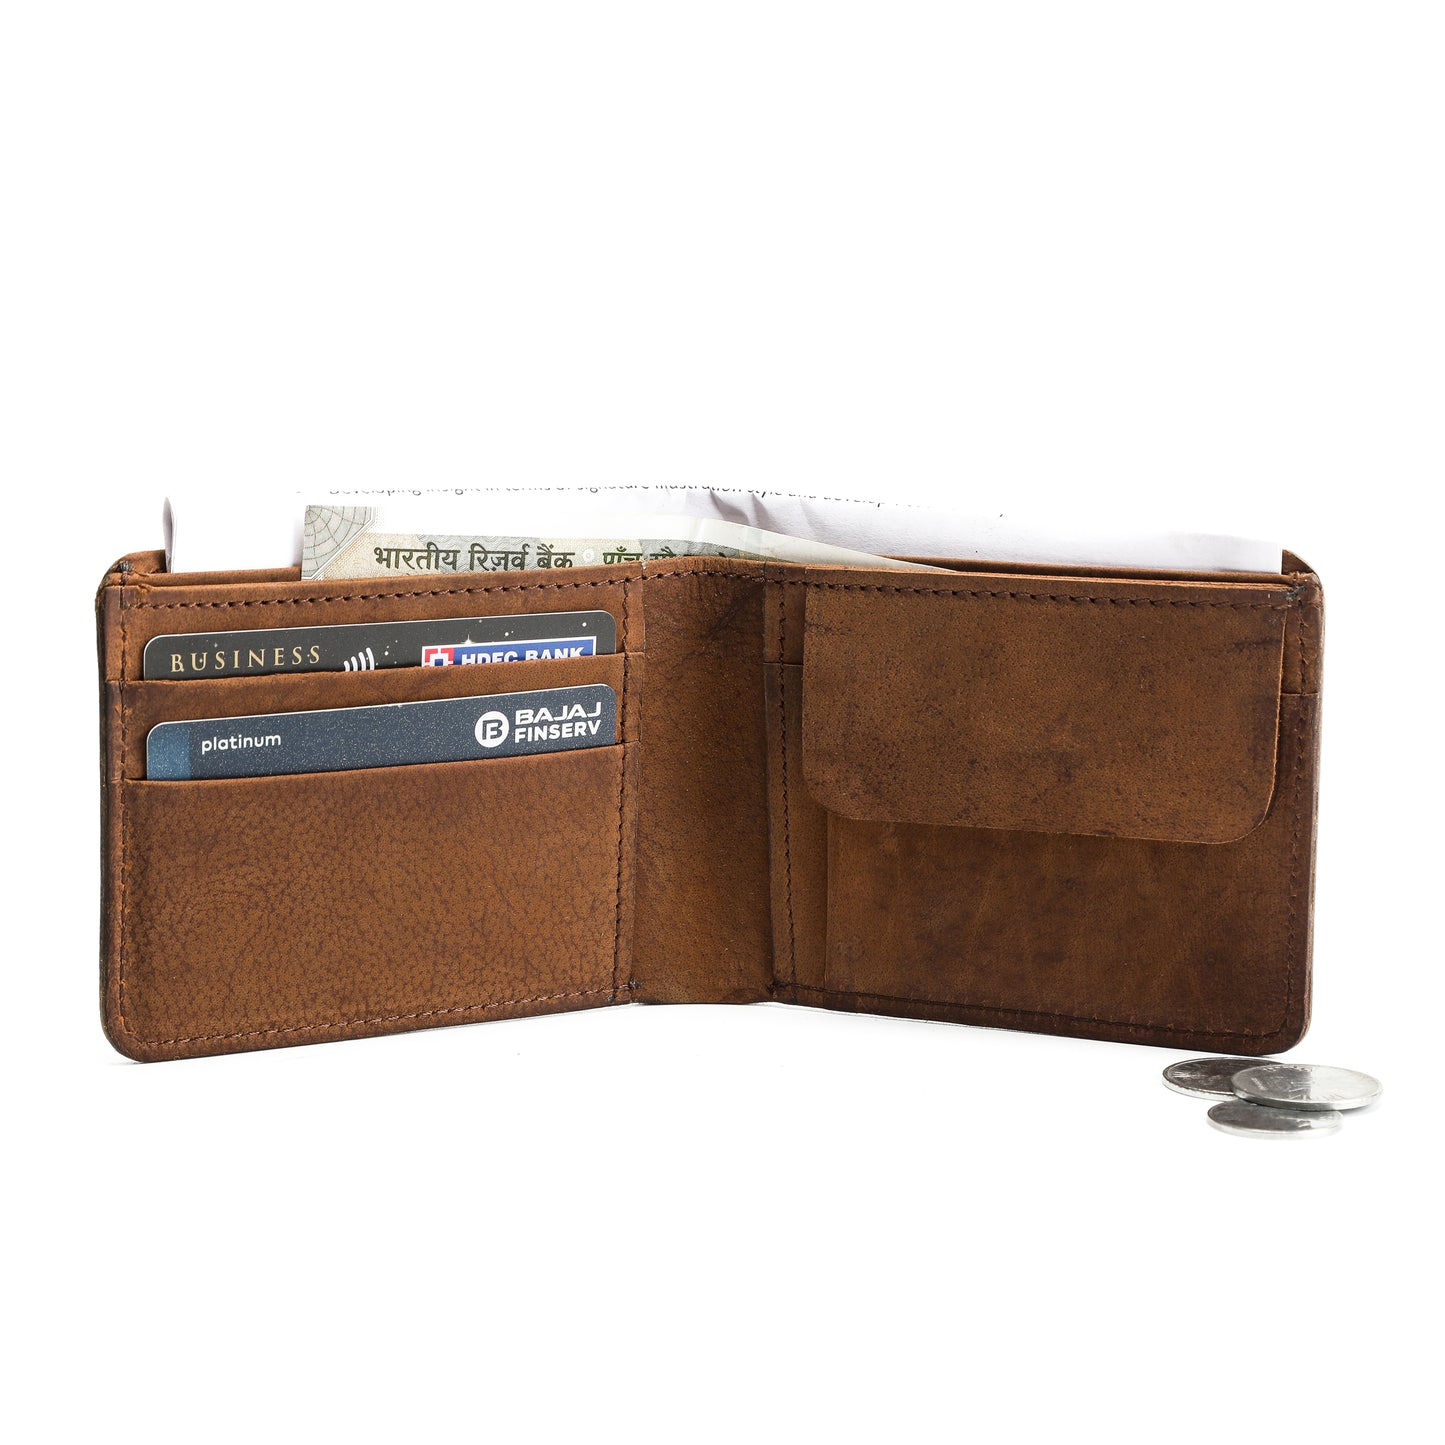 Classic 2.0- Leather bifold Wallet